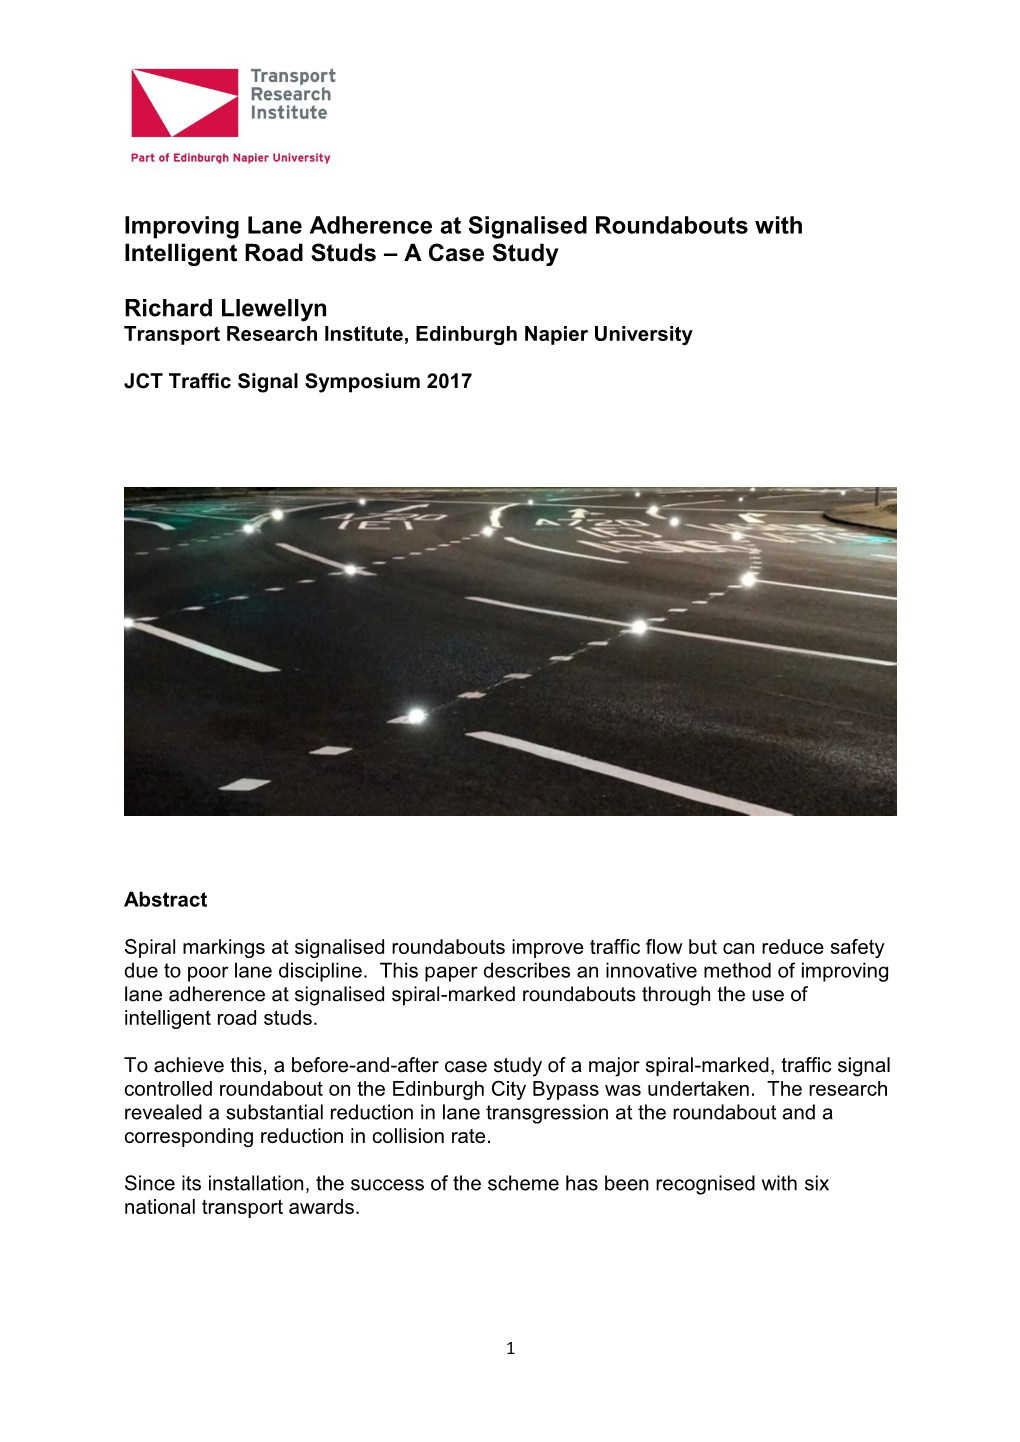 Improving Lane Adherence at Signalised Roundabouts with Intelligent Road Studs – a Case Study